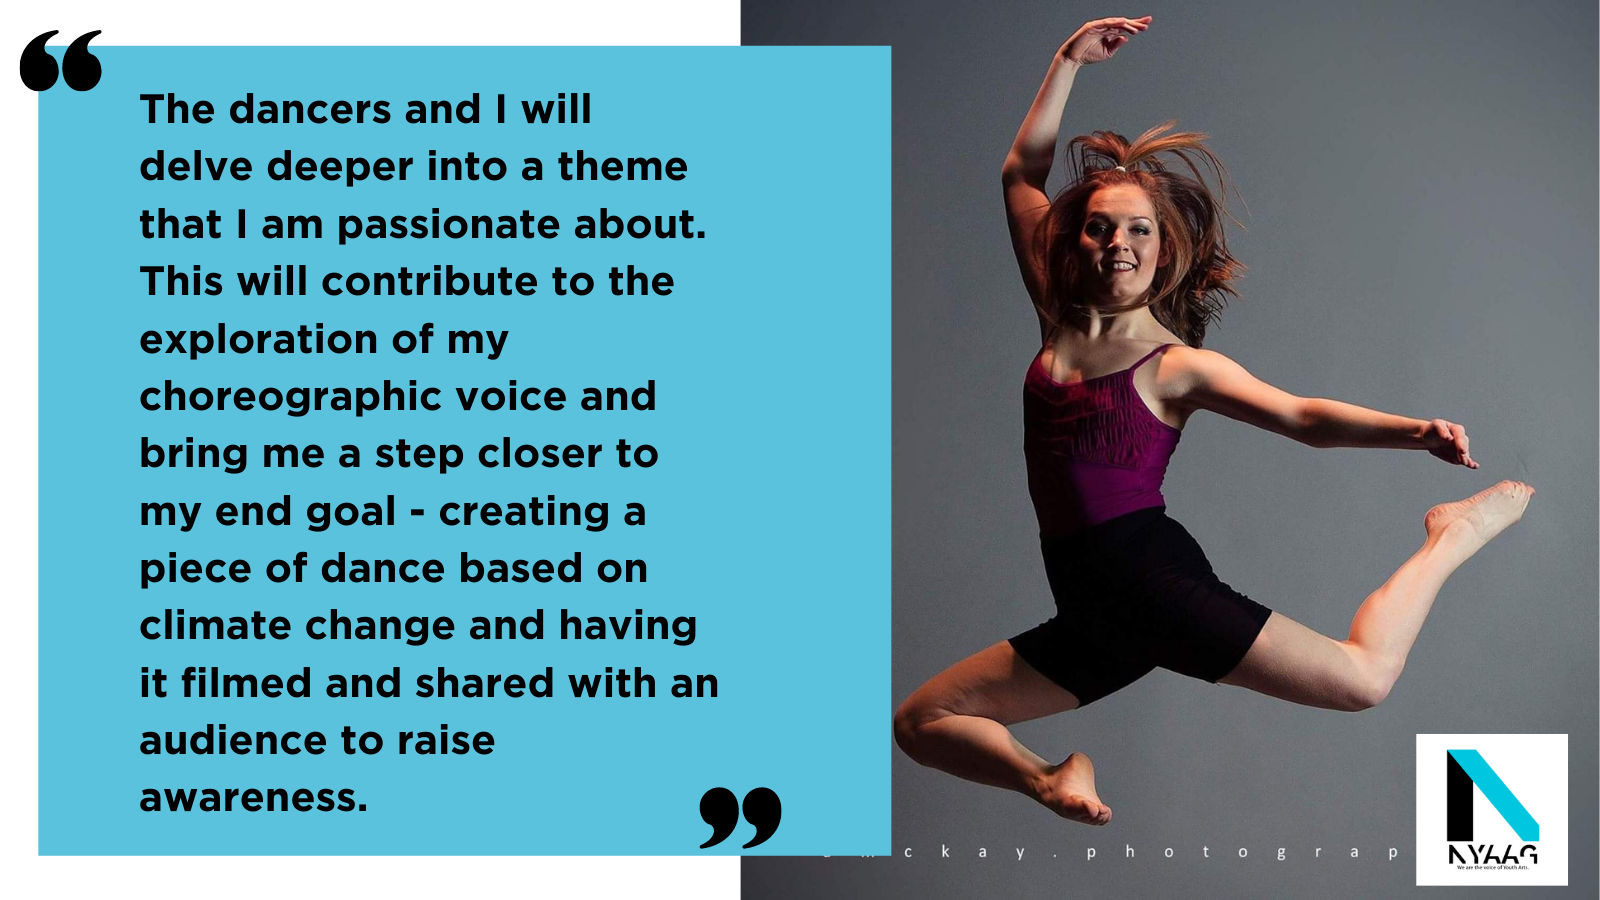 Aimee Friel is a dancer exploring ways of creating contemporary thematic dance with funding from the Nurturing Talent Fund